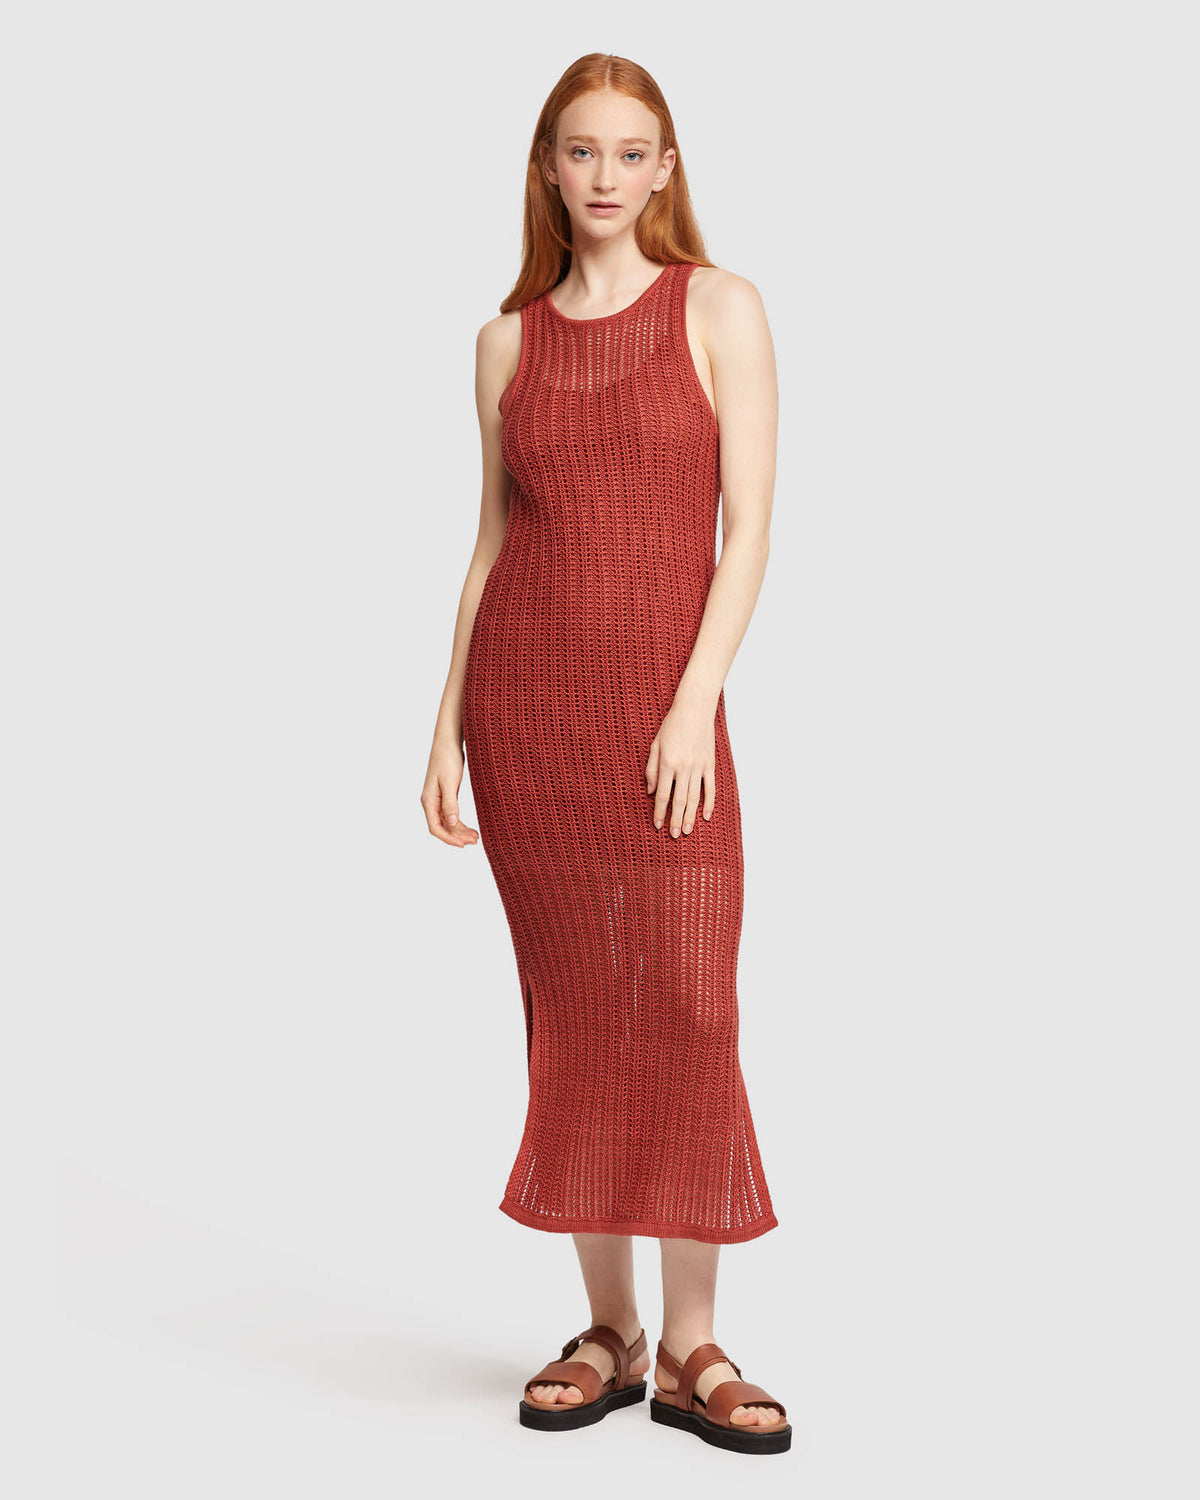 KATHERINE KNIT DRESS WITH SLIP - AVAILABLE ~ 1-2 weeks WOMENS DRESSES